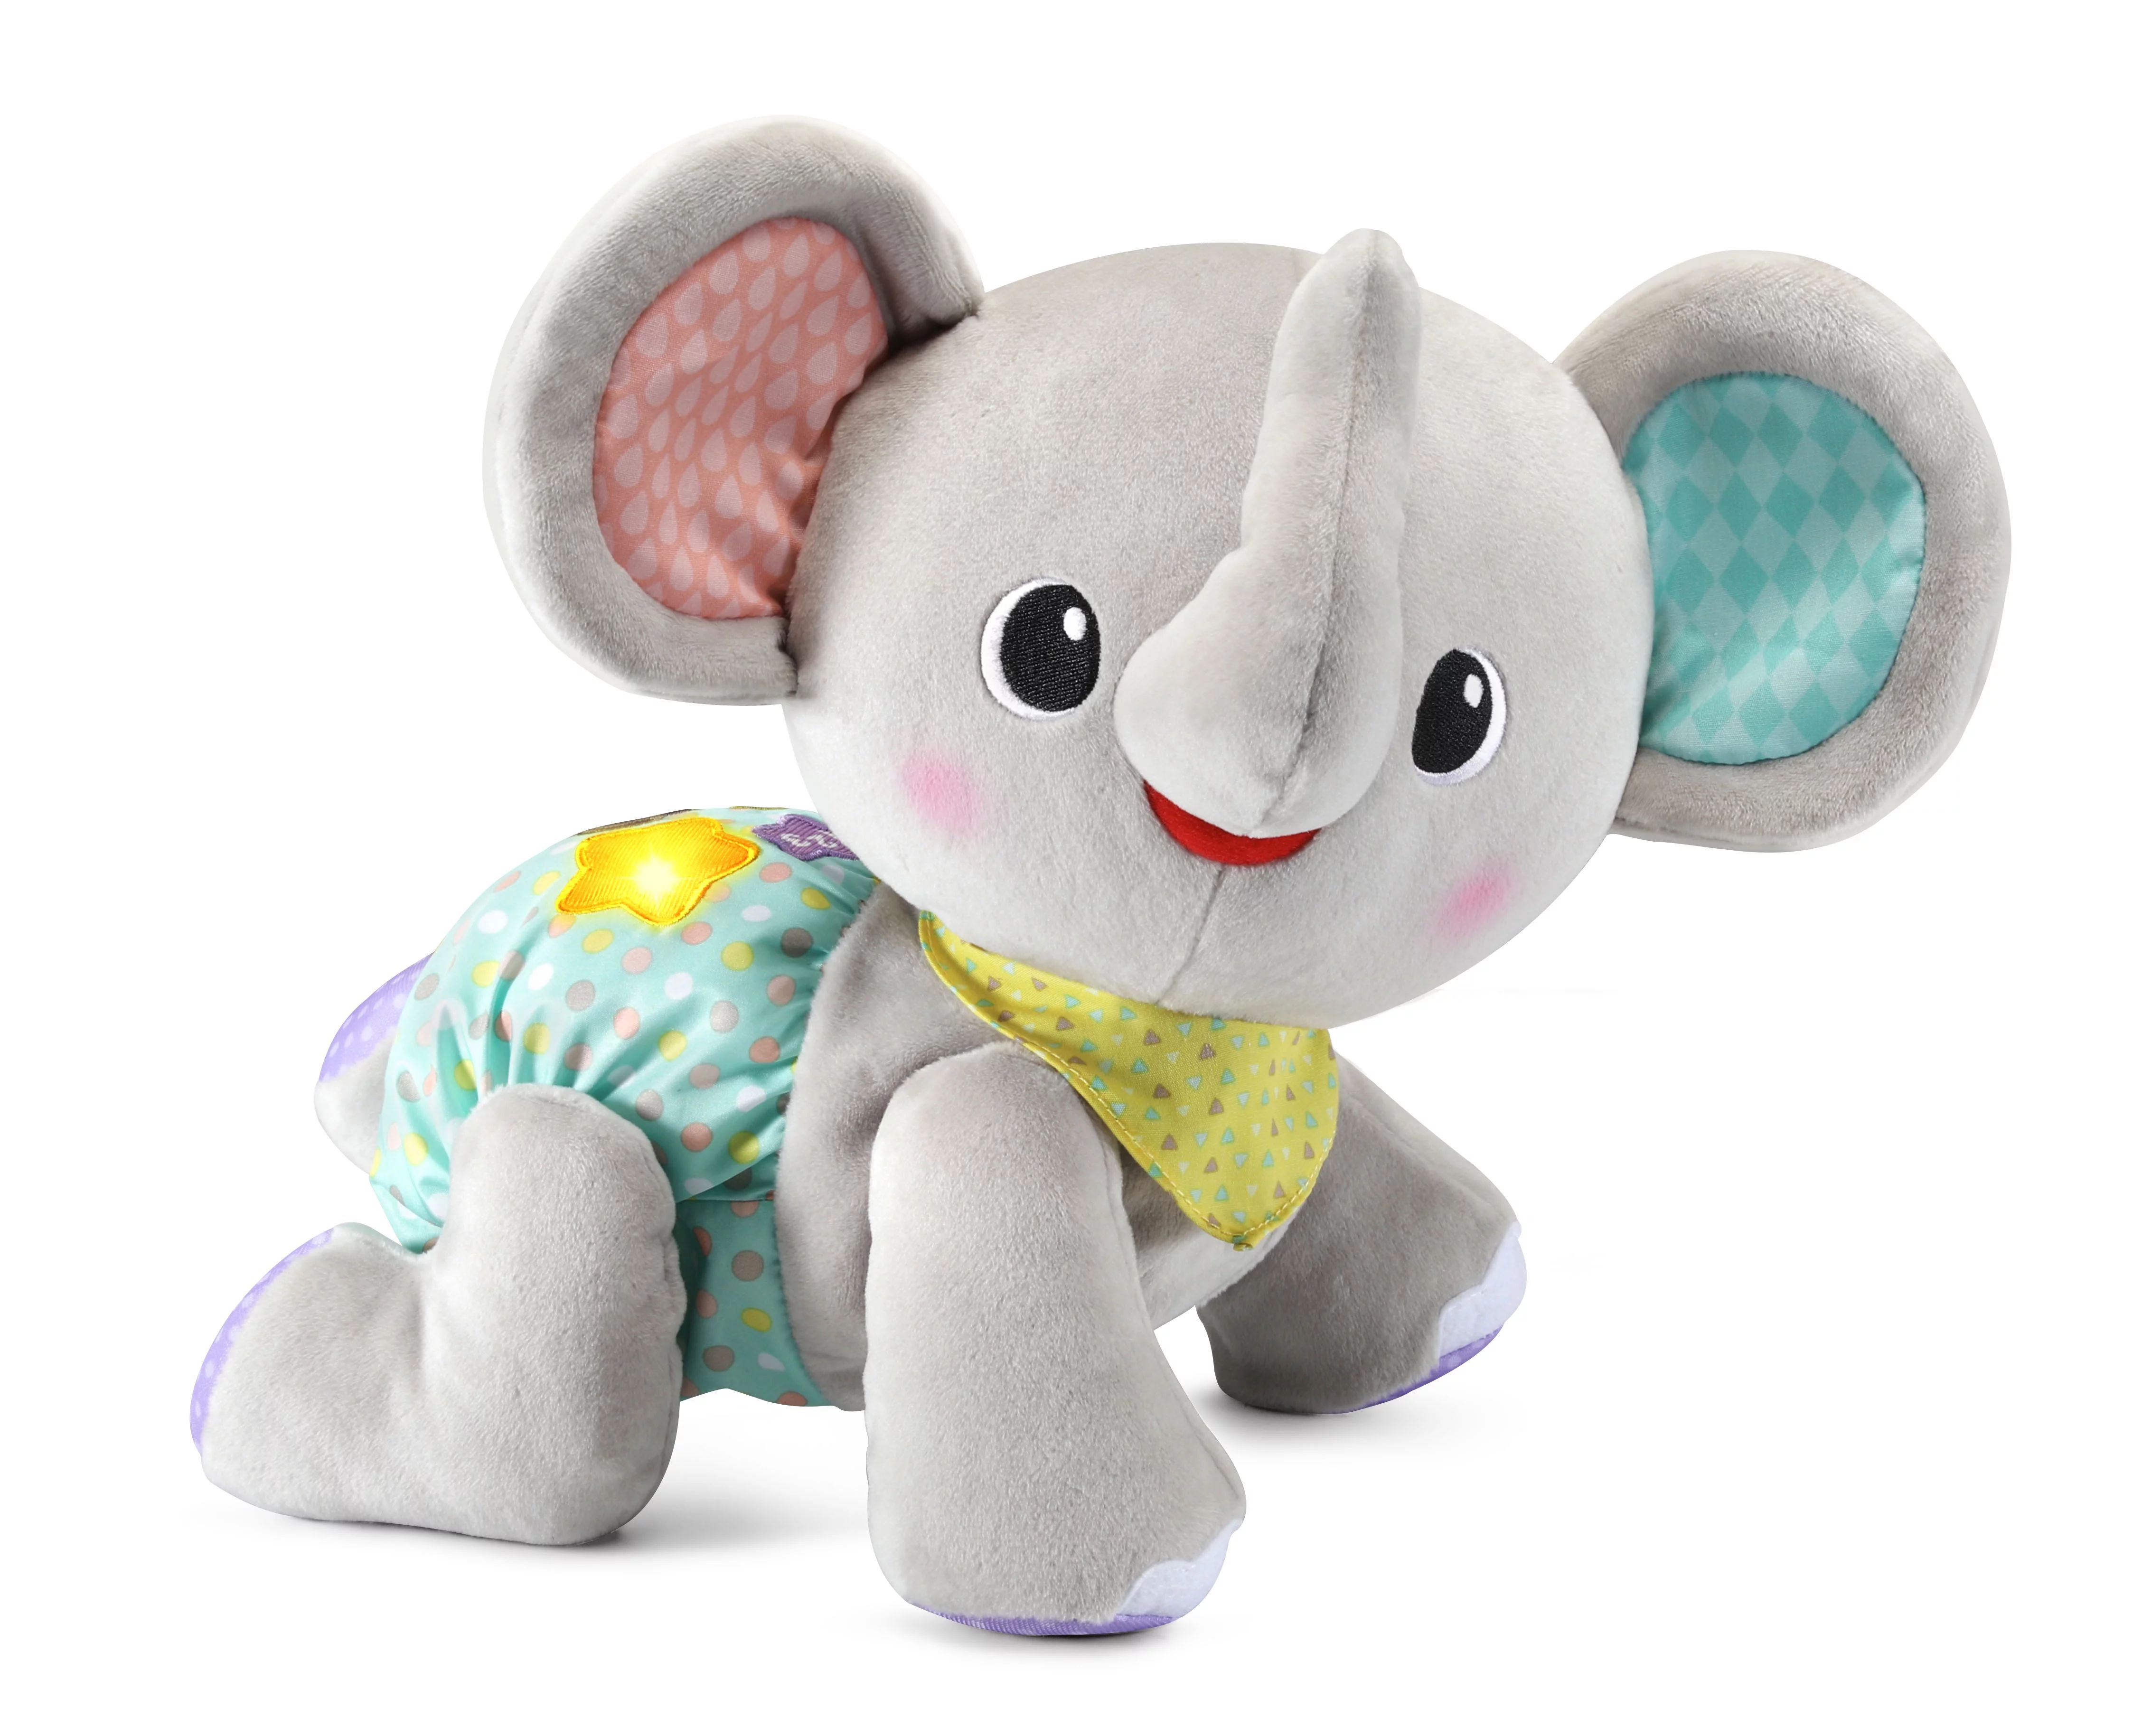 VTech Explore and Crawl Elephant Plush Baby and Toddler Toy, Gray | Walmart (US)